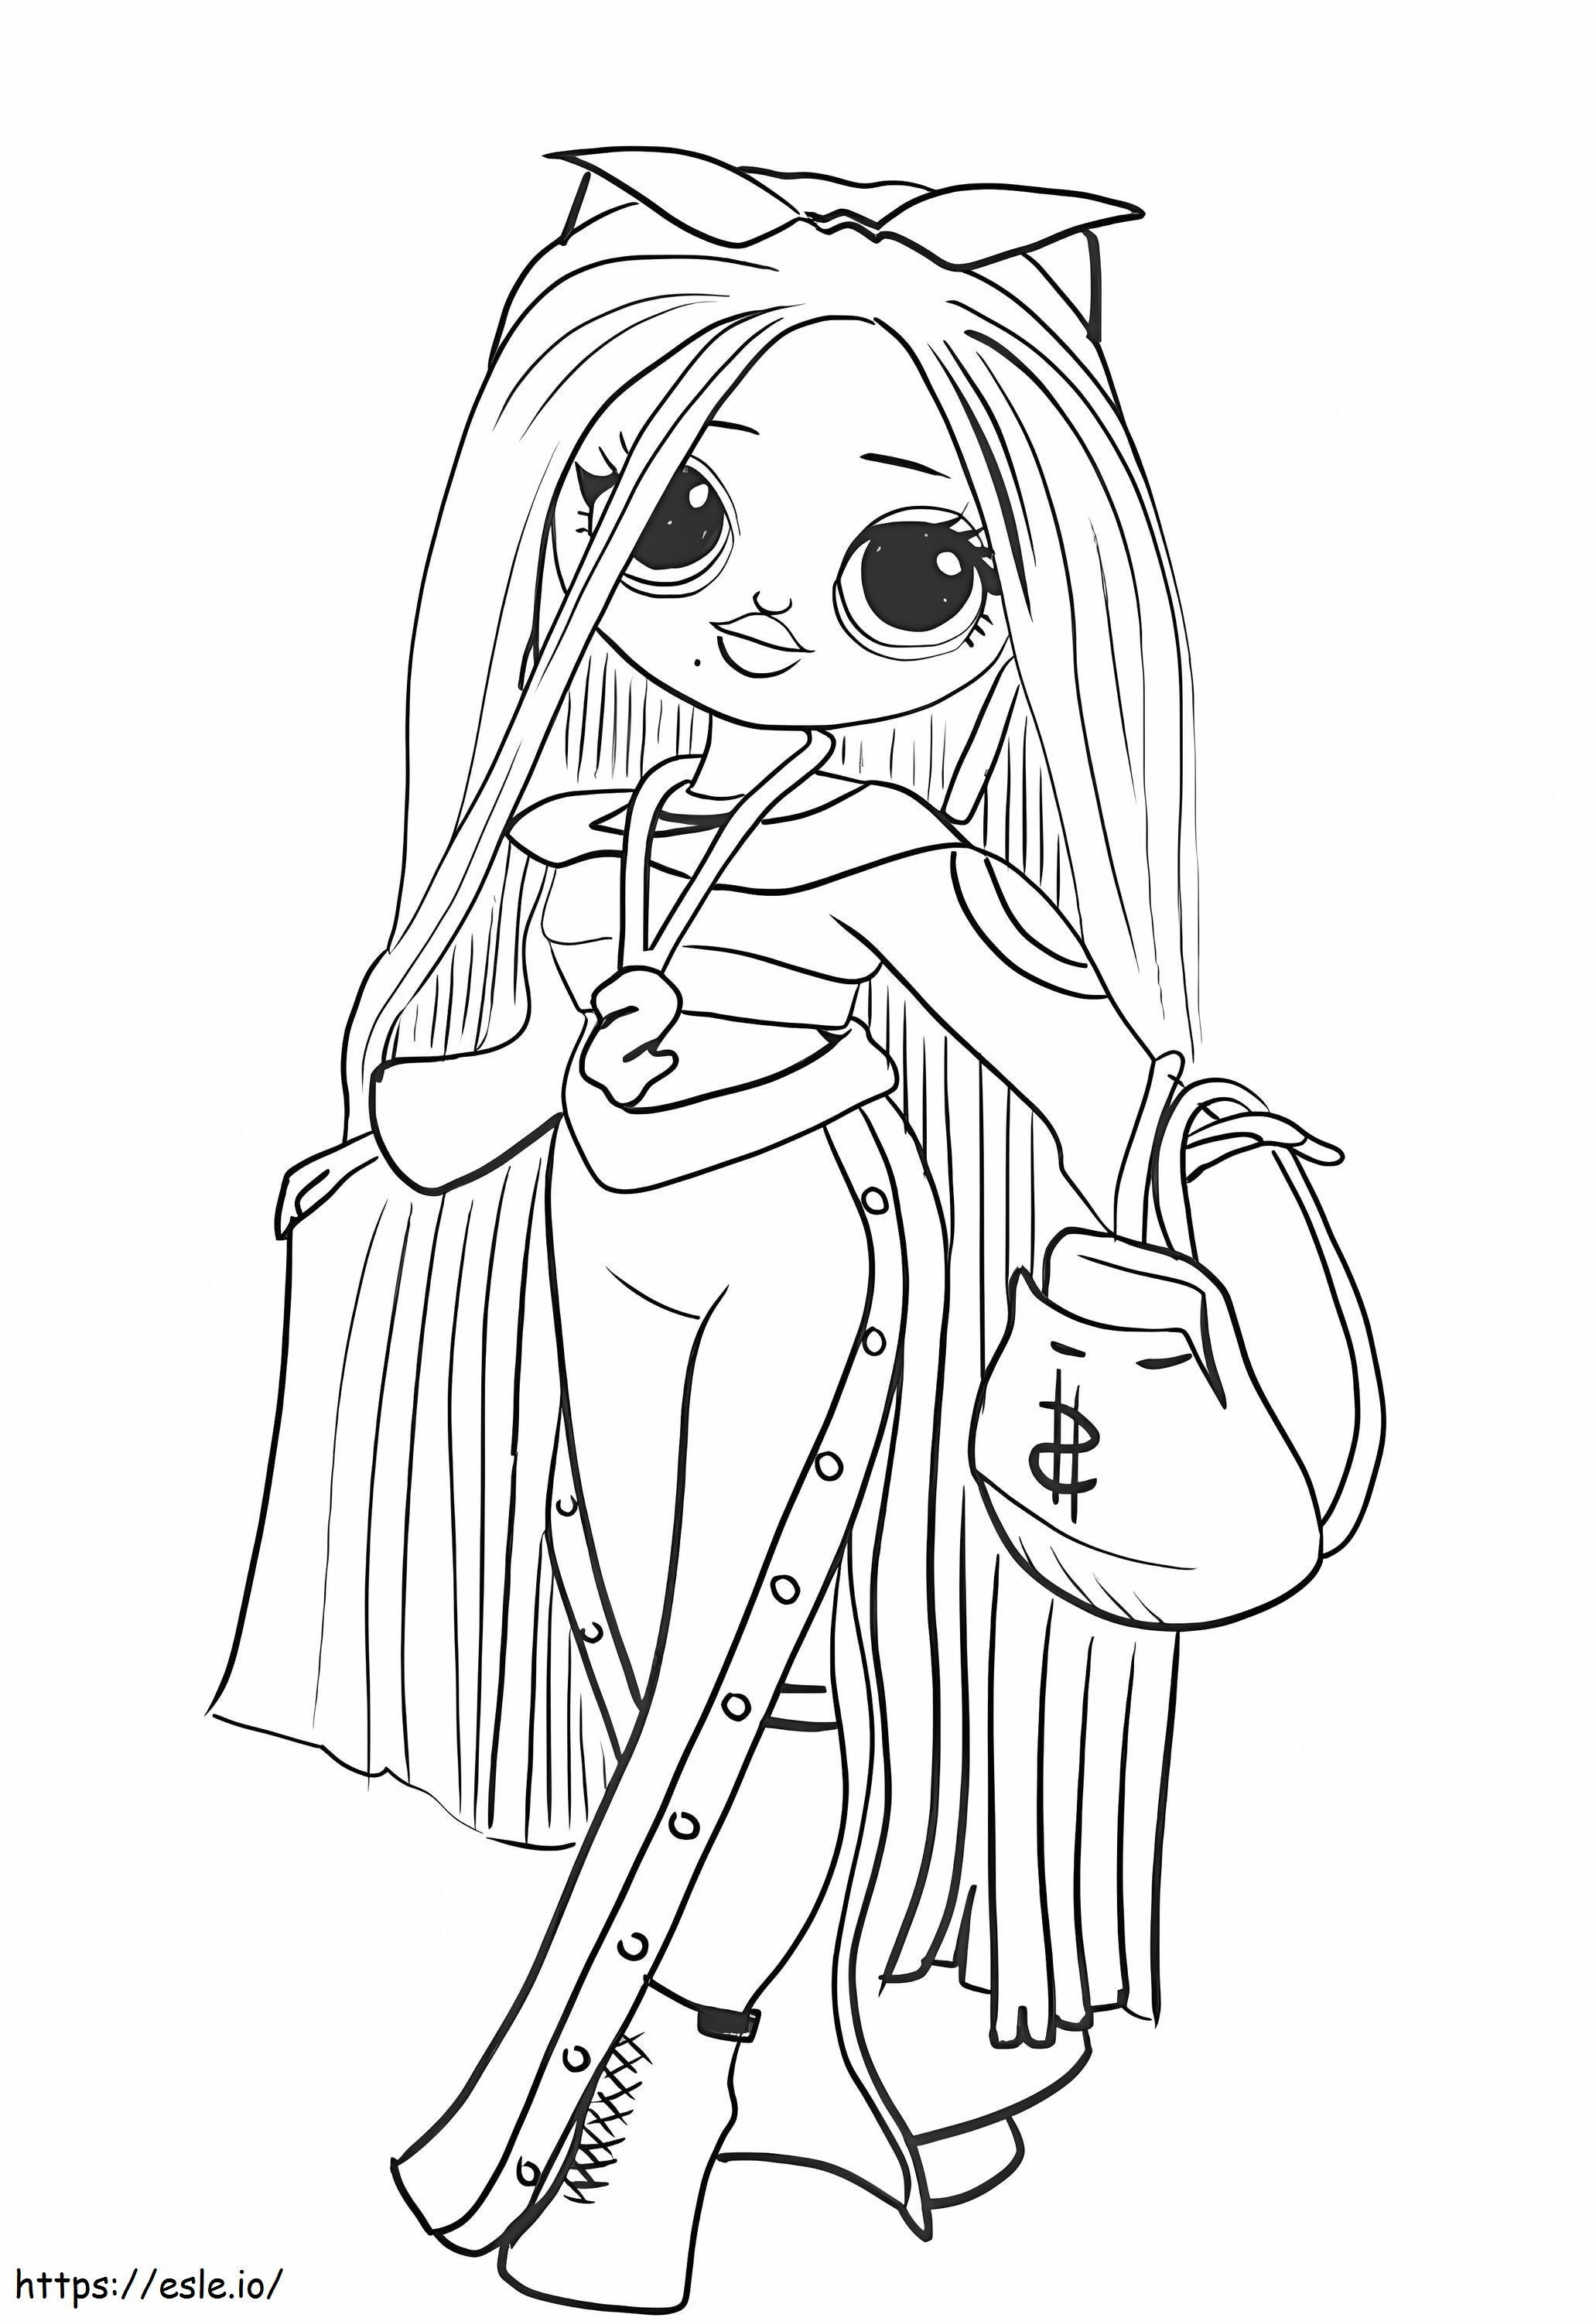 OMG Fashion LOL OMG Doll Coloring Pages - Free Printable Sheets